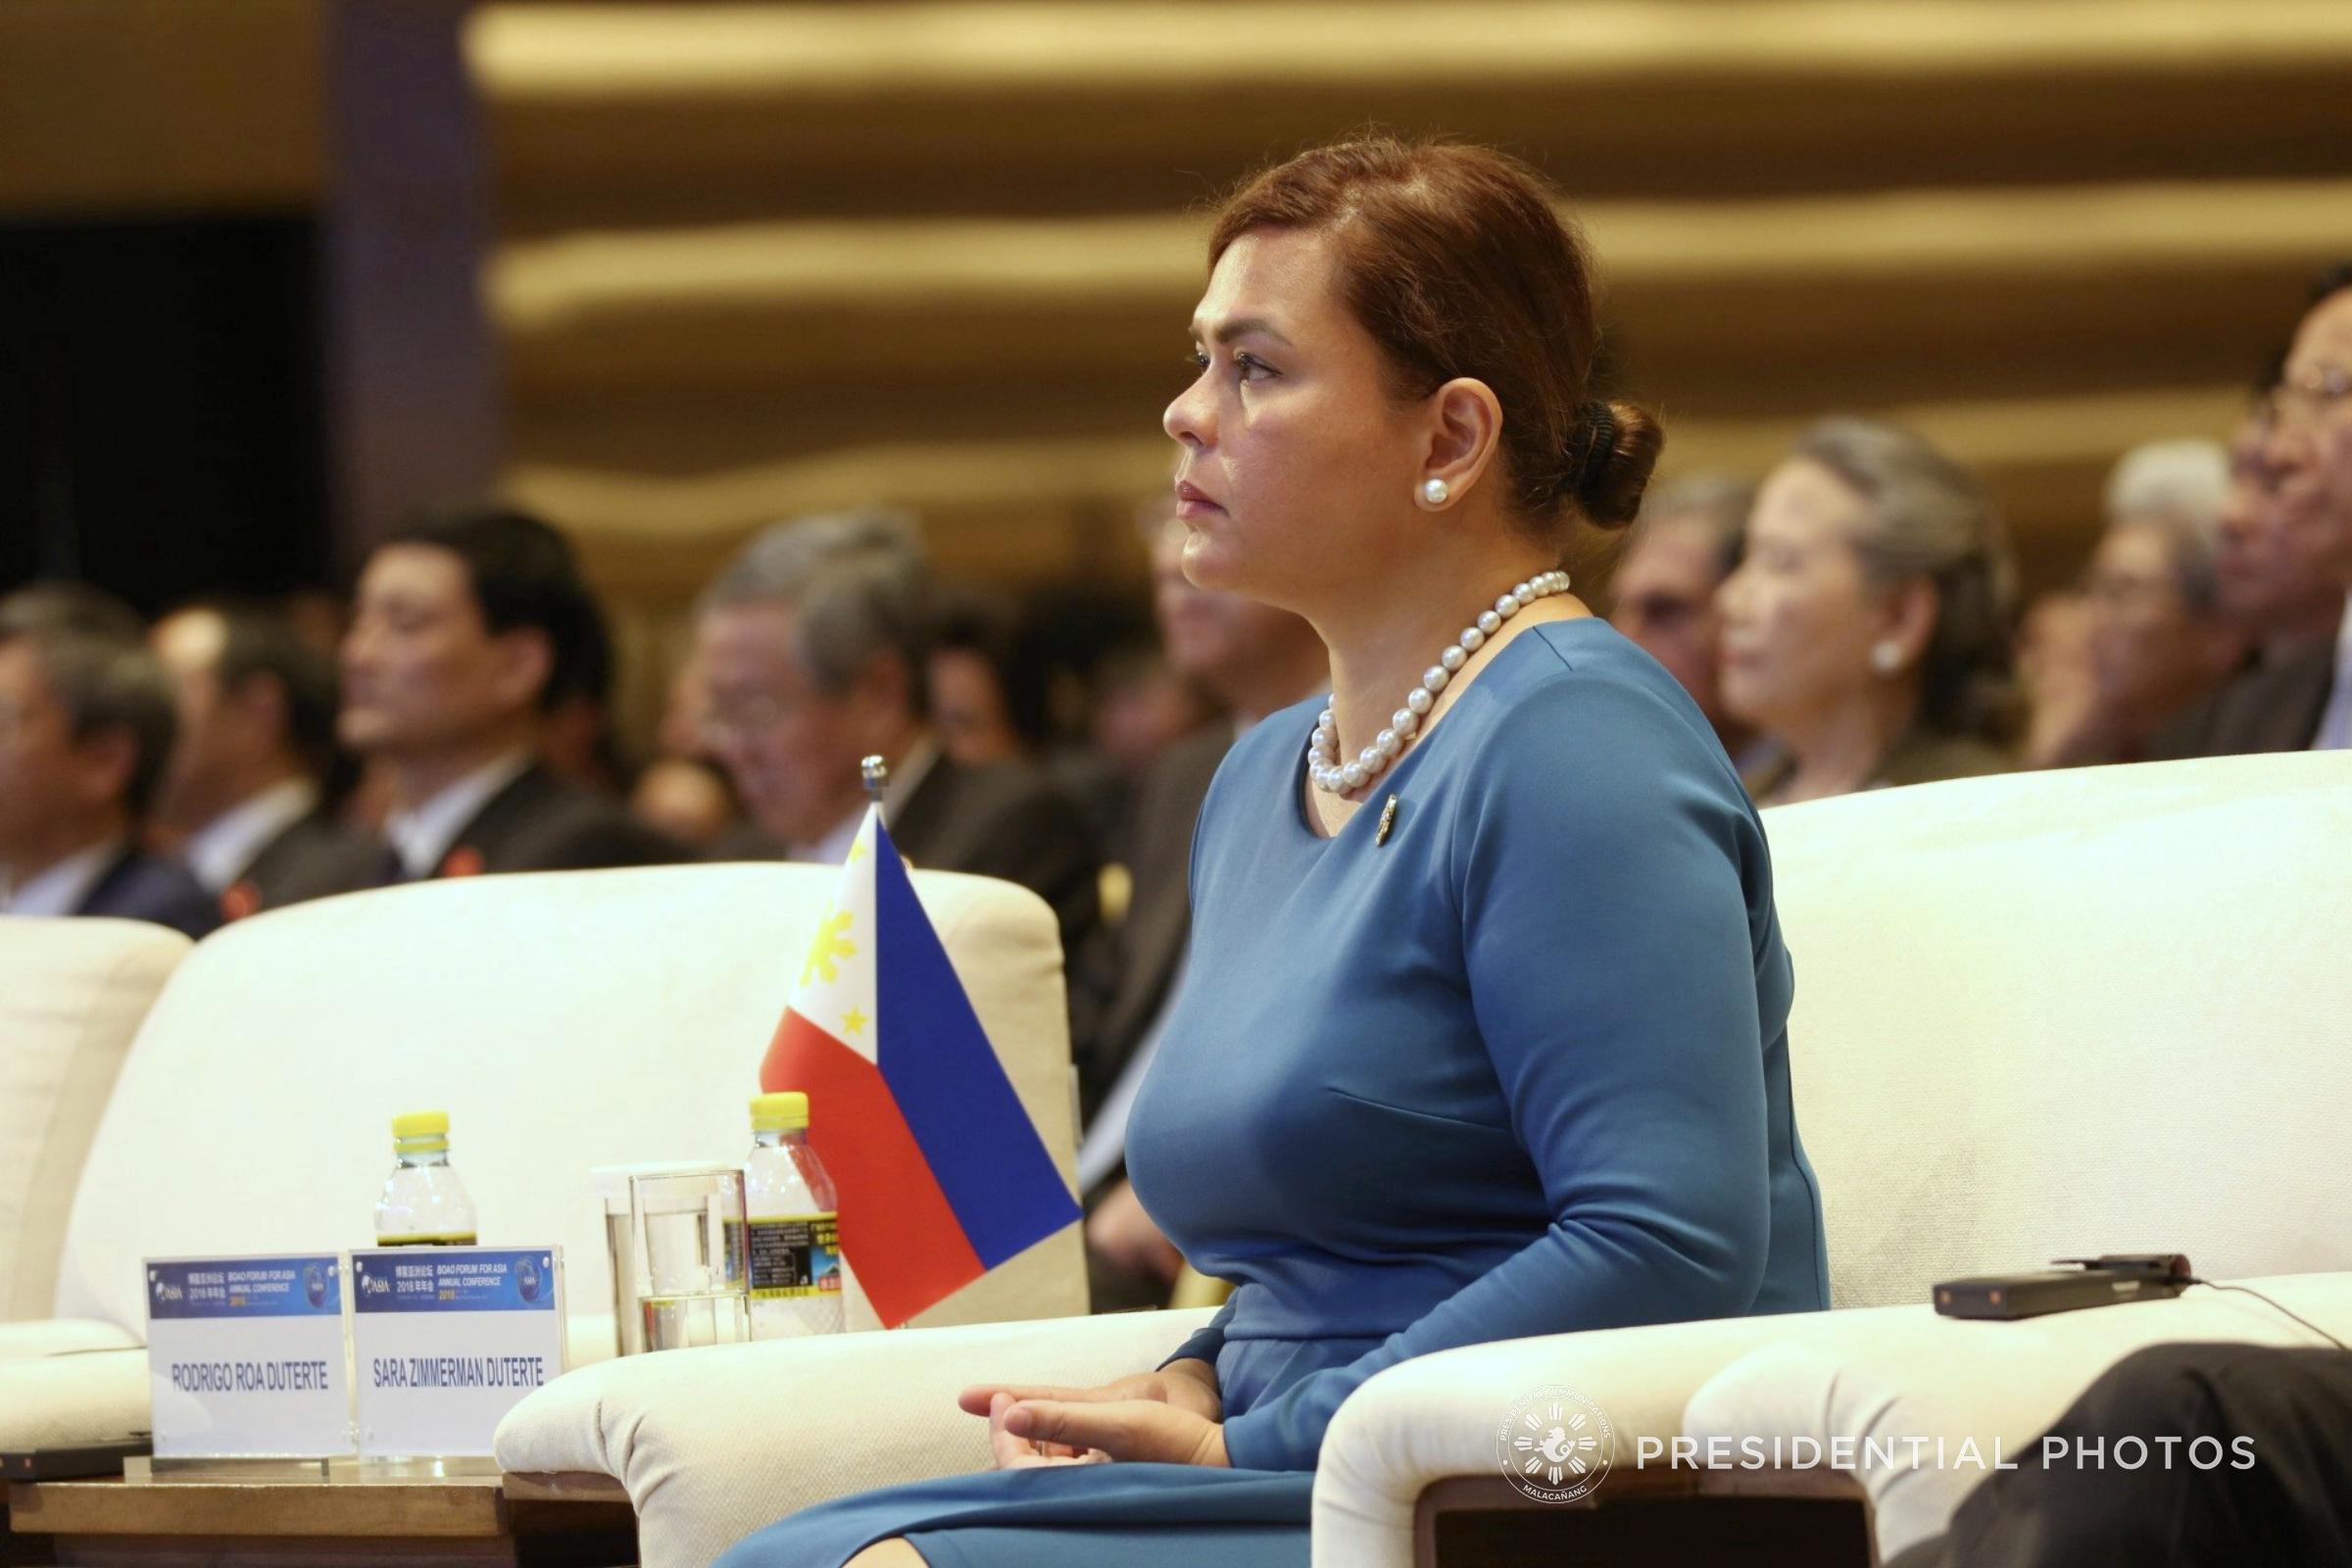 Vice President Sara Duterte’s “no comment” remark on China’s continued harassment in the West Philippine Sea echoes her “dangerous depths of her allegiance” with Beijing.